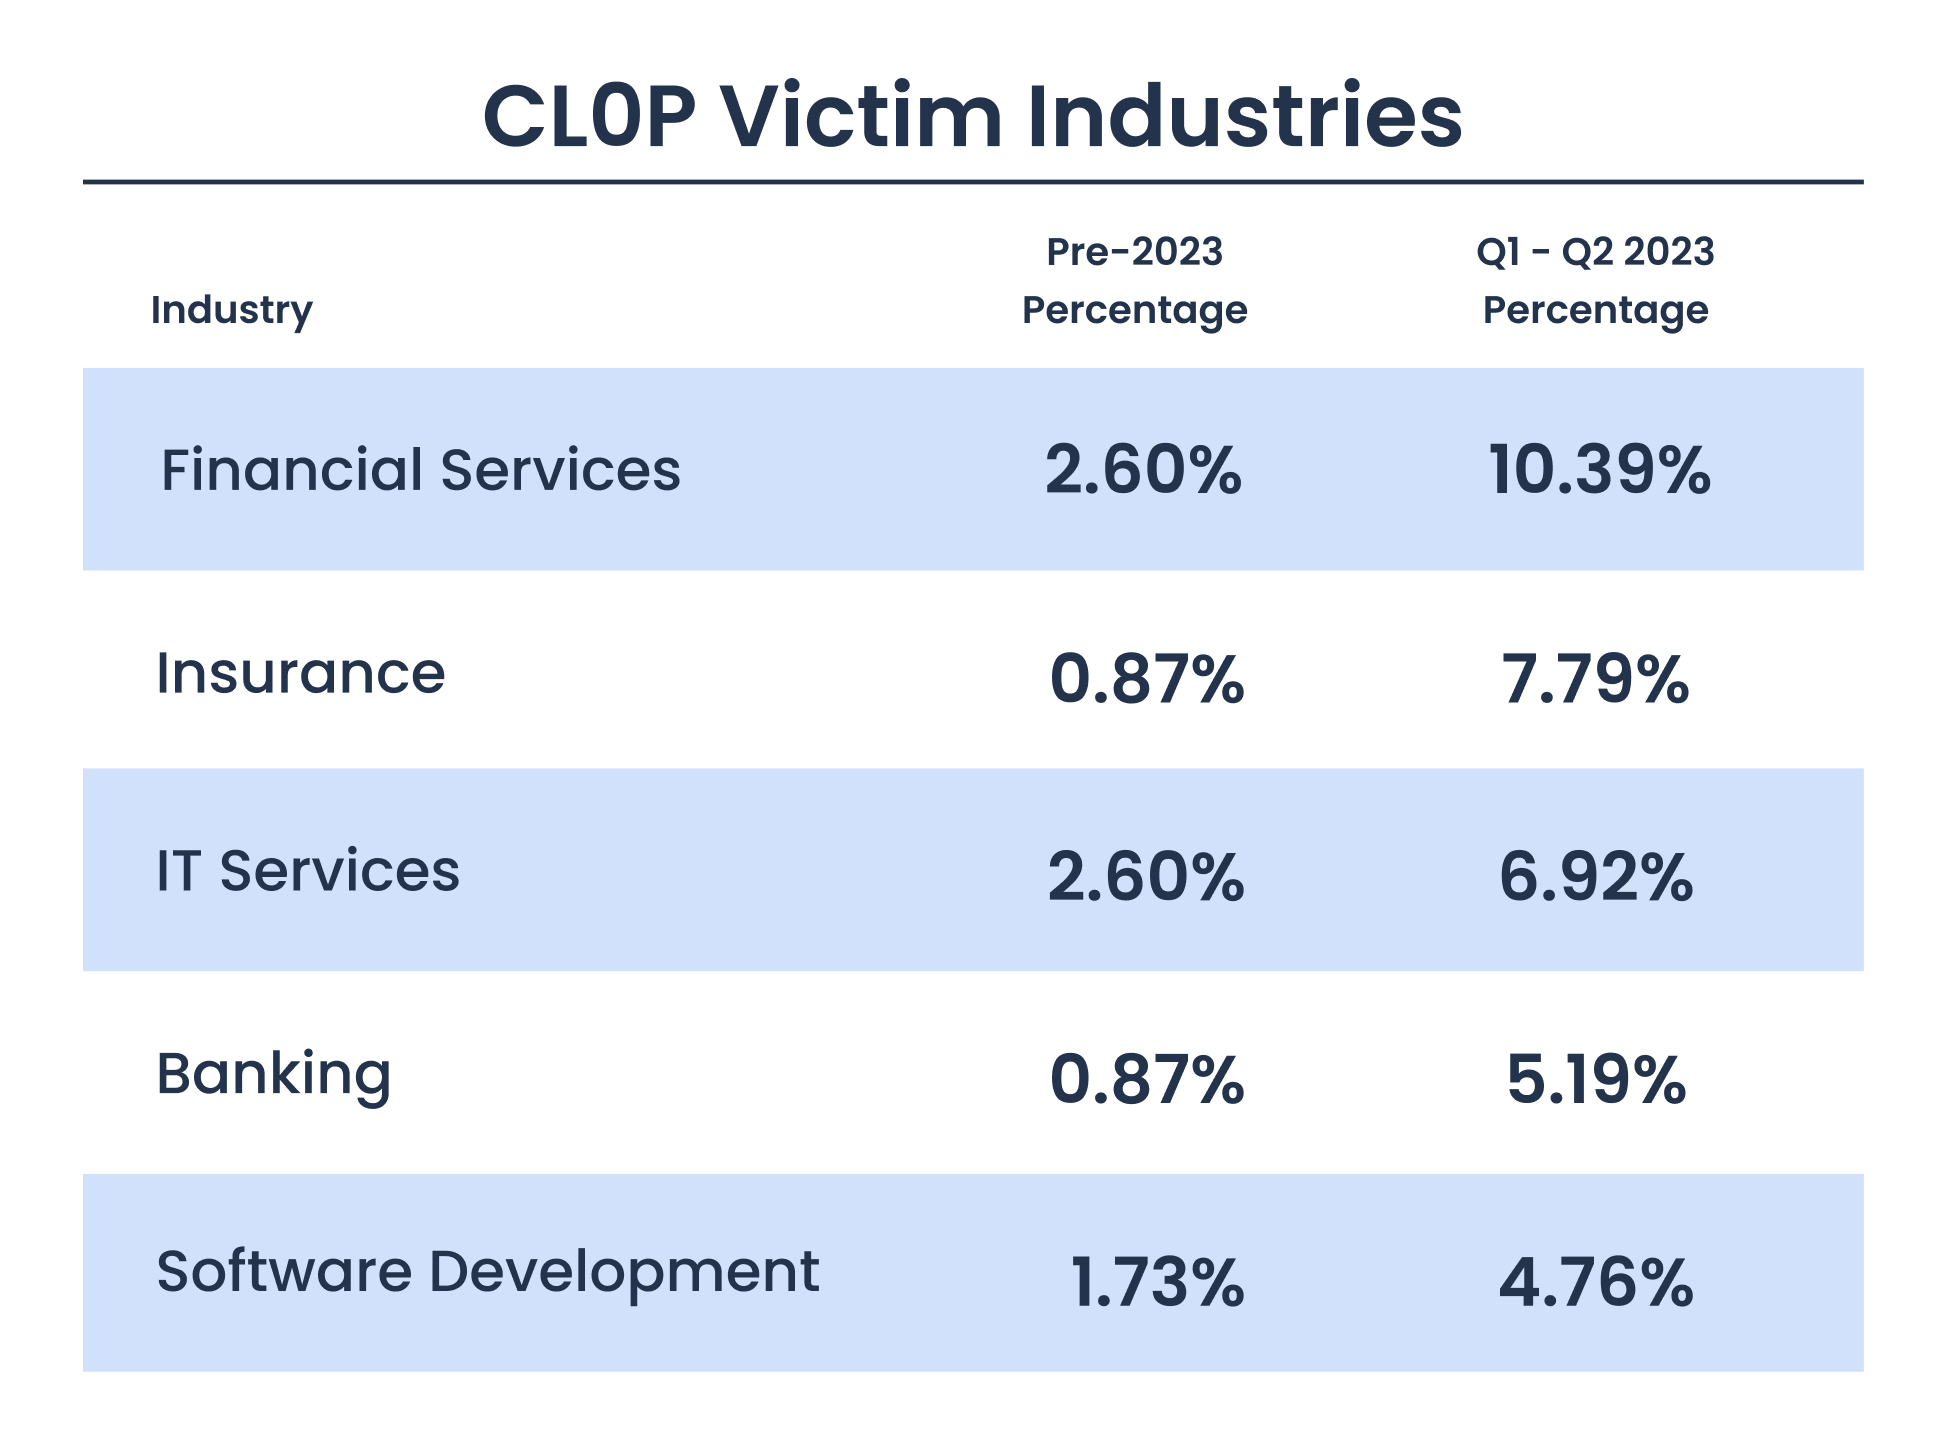 [CHART] CL0P Victims Percentage by Industry Q1 - Q2 2023 vs Pre-2023